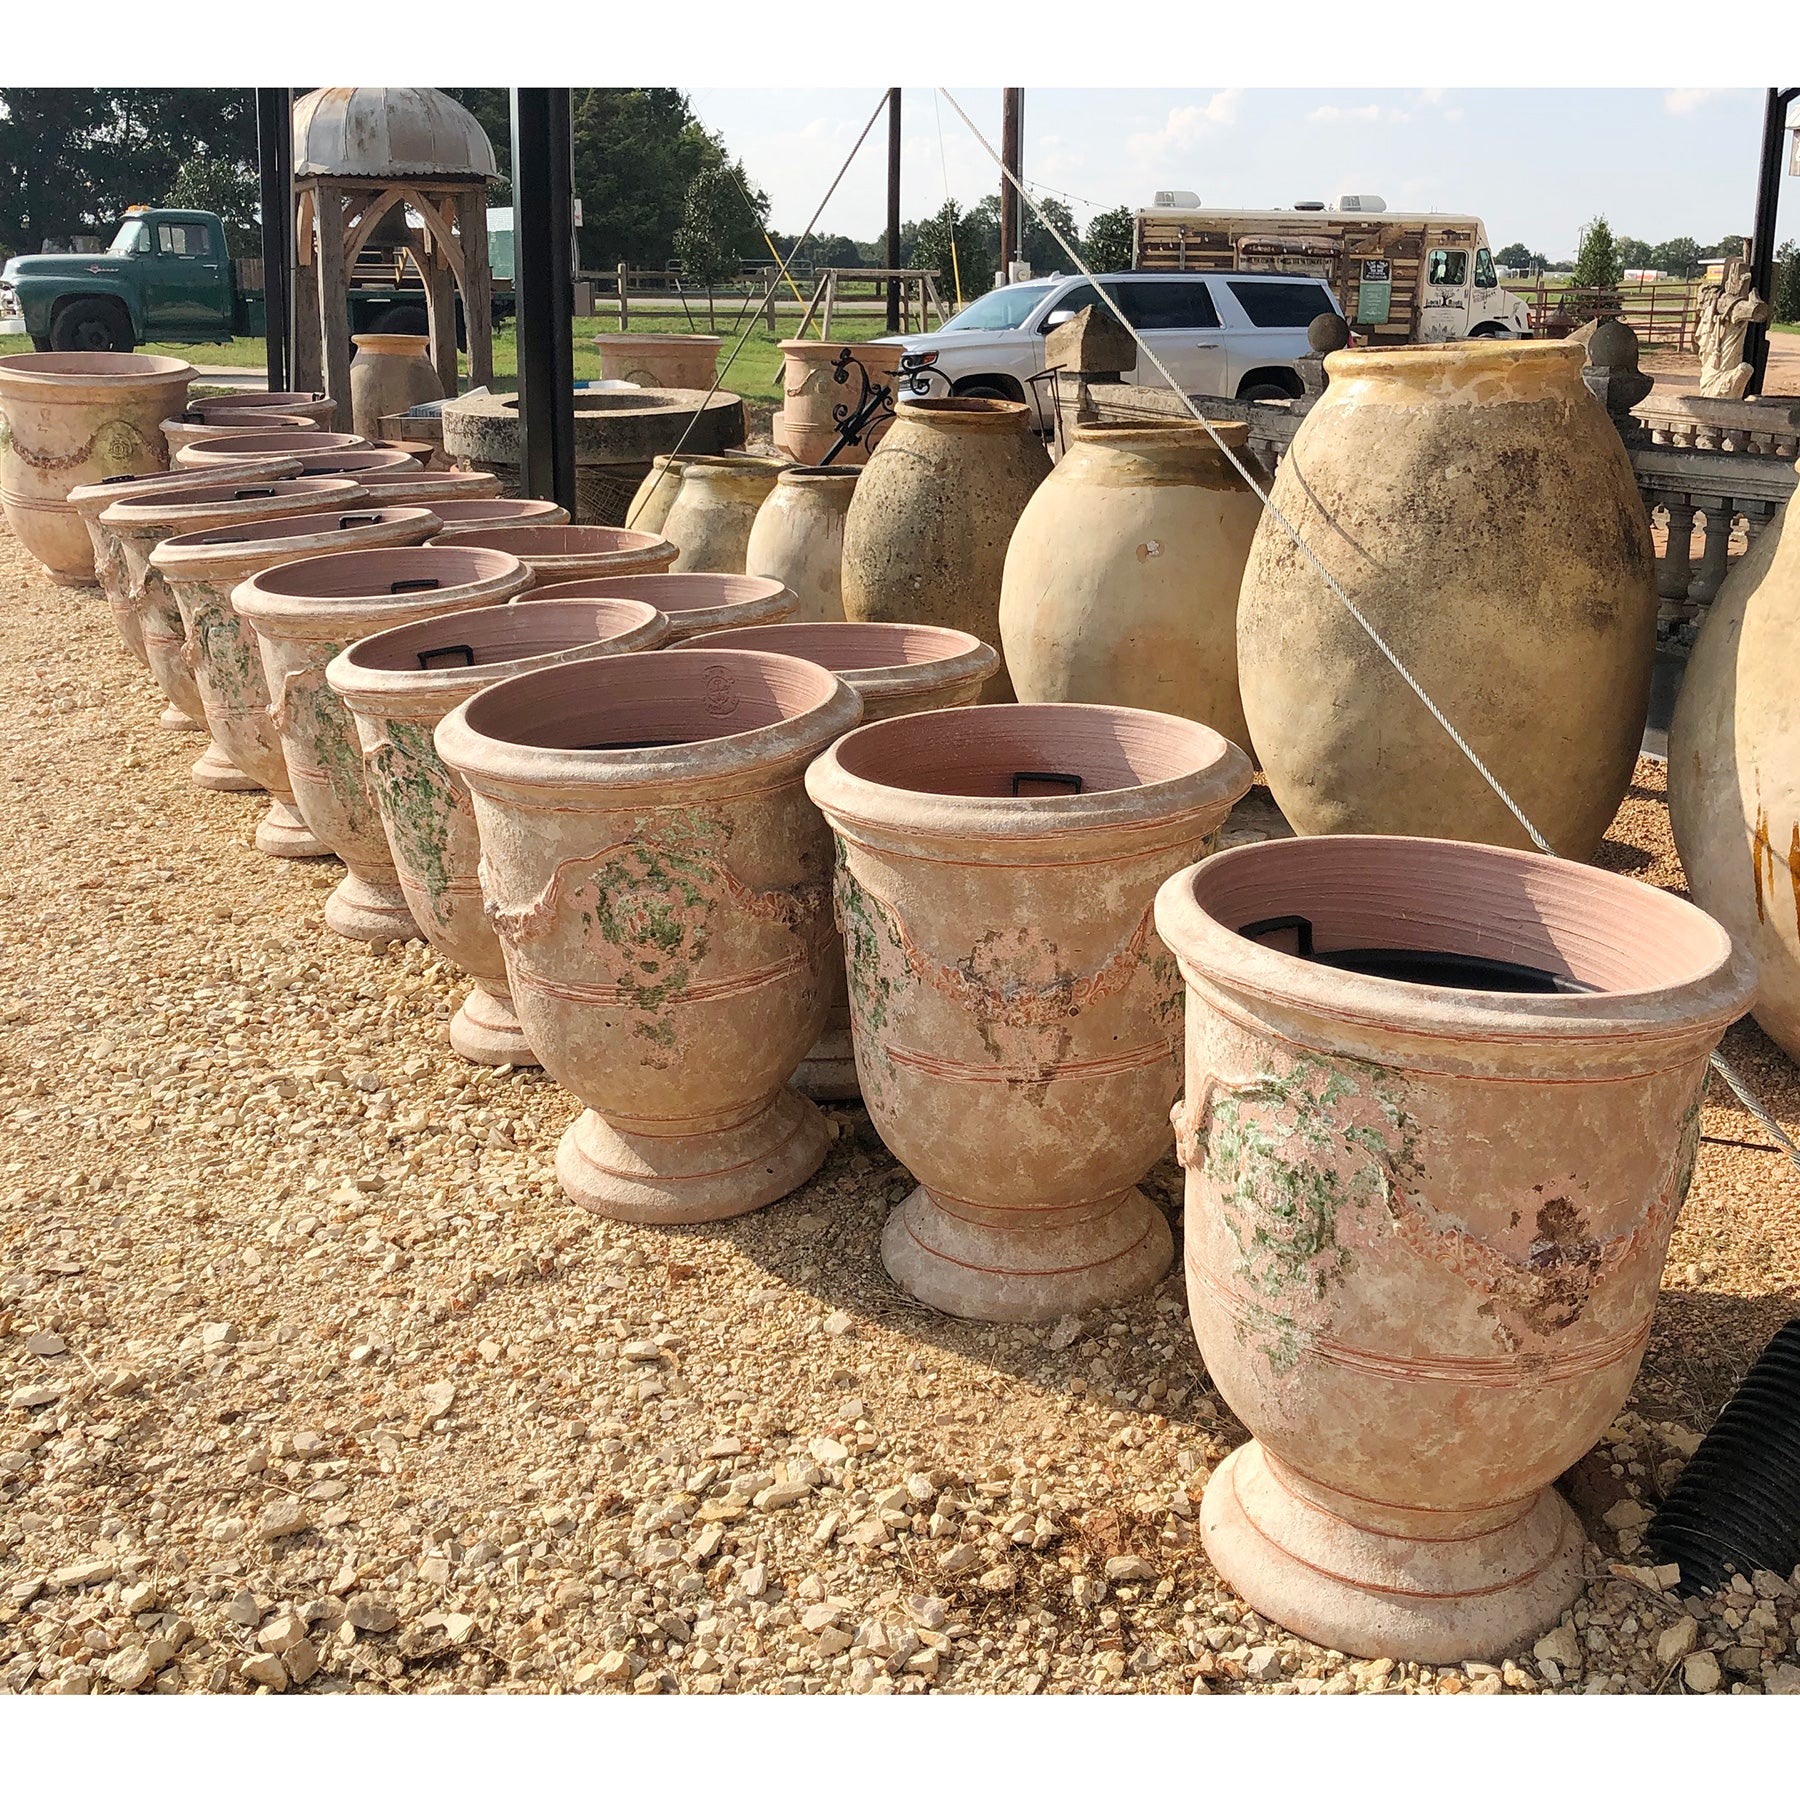 Anduze Versailles '32' Terracotta Pot - One available in Round Top, Texas